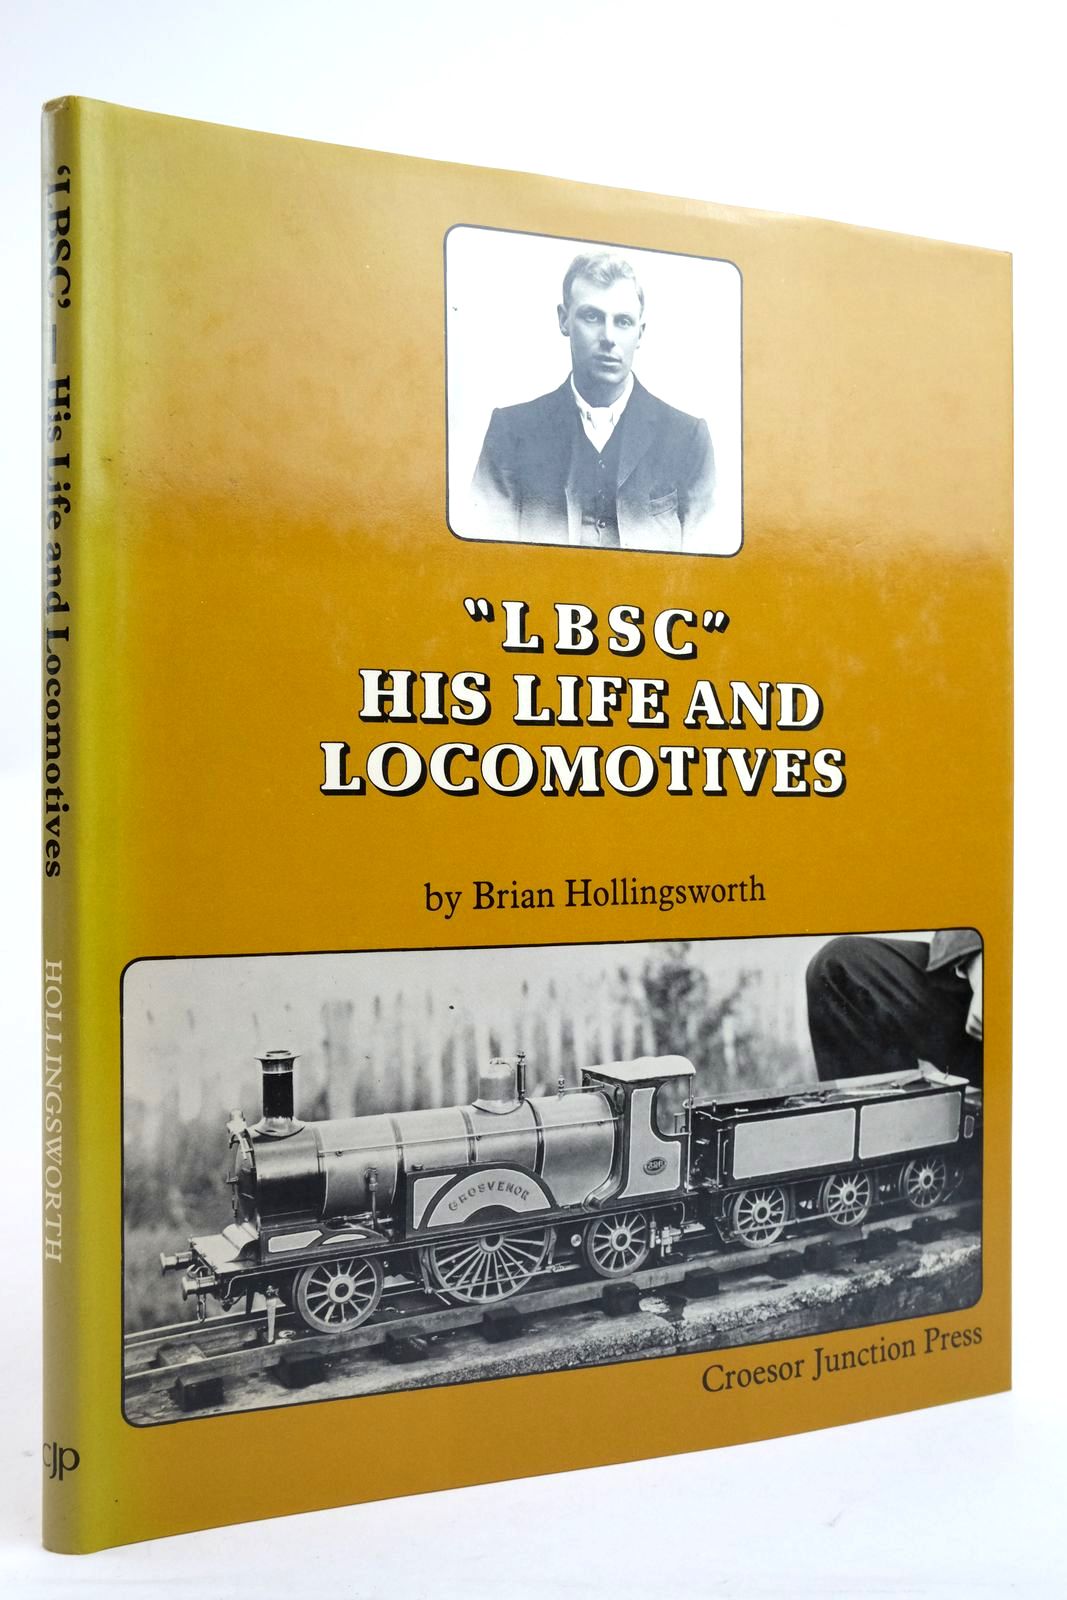 Photo of 'LBSC' - HIS LIFE AND LOCOMOTIVES written by Hollingsworth, Brian published by Croesor Junction Press (STOCK CODE: 2136188)  for sale by Stella & Rose's Books